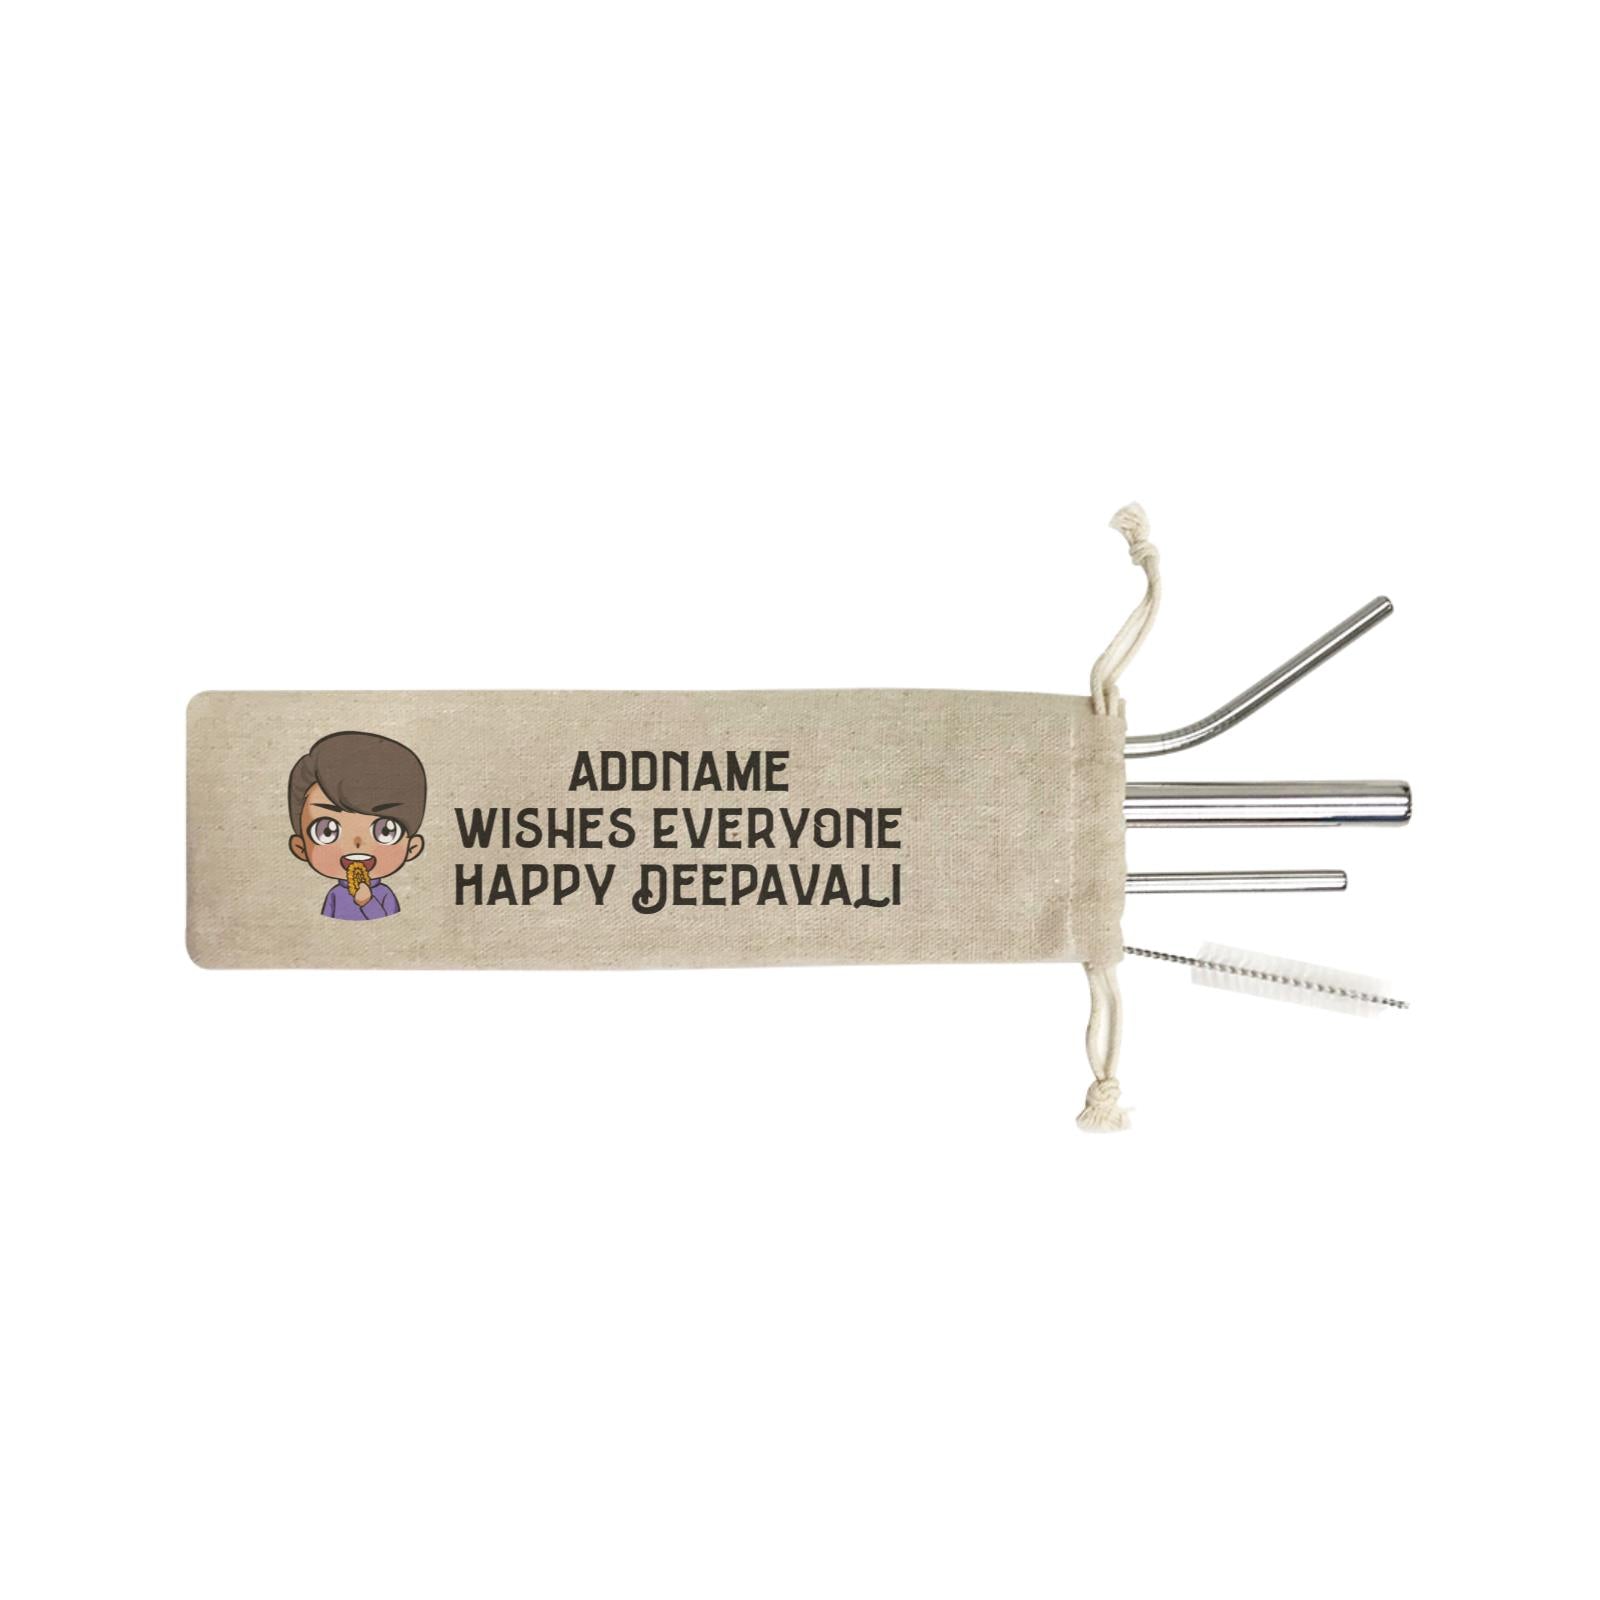 Deepavali Chibi Little Boy Front Addname Wishes Everyone Deepavali SB 4-In-1 Stainless Steel Straw Set in Satchel